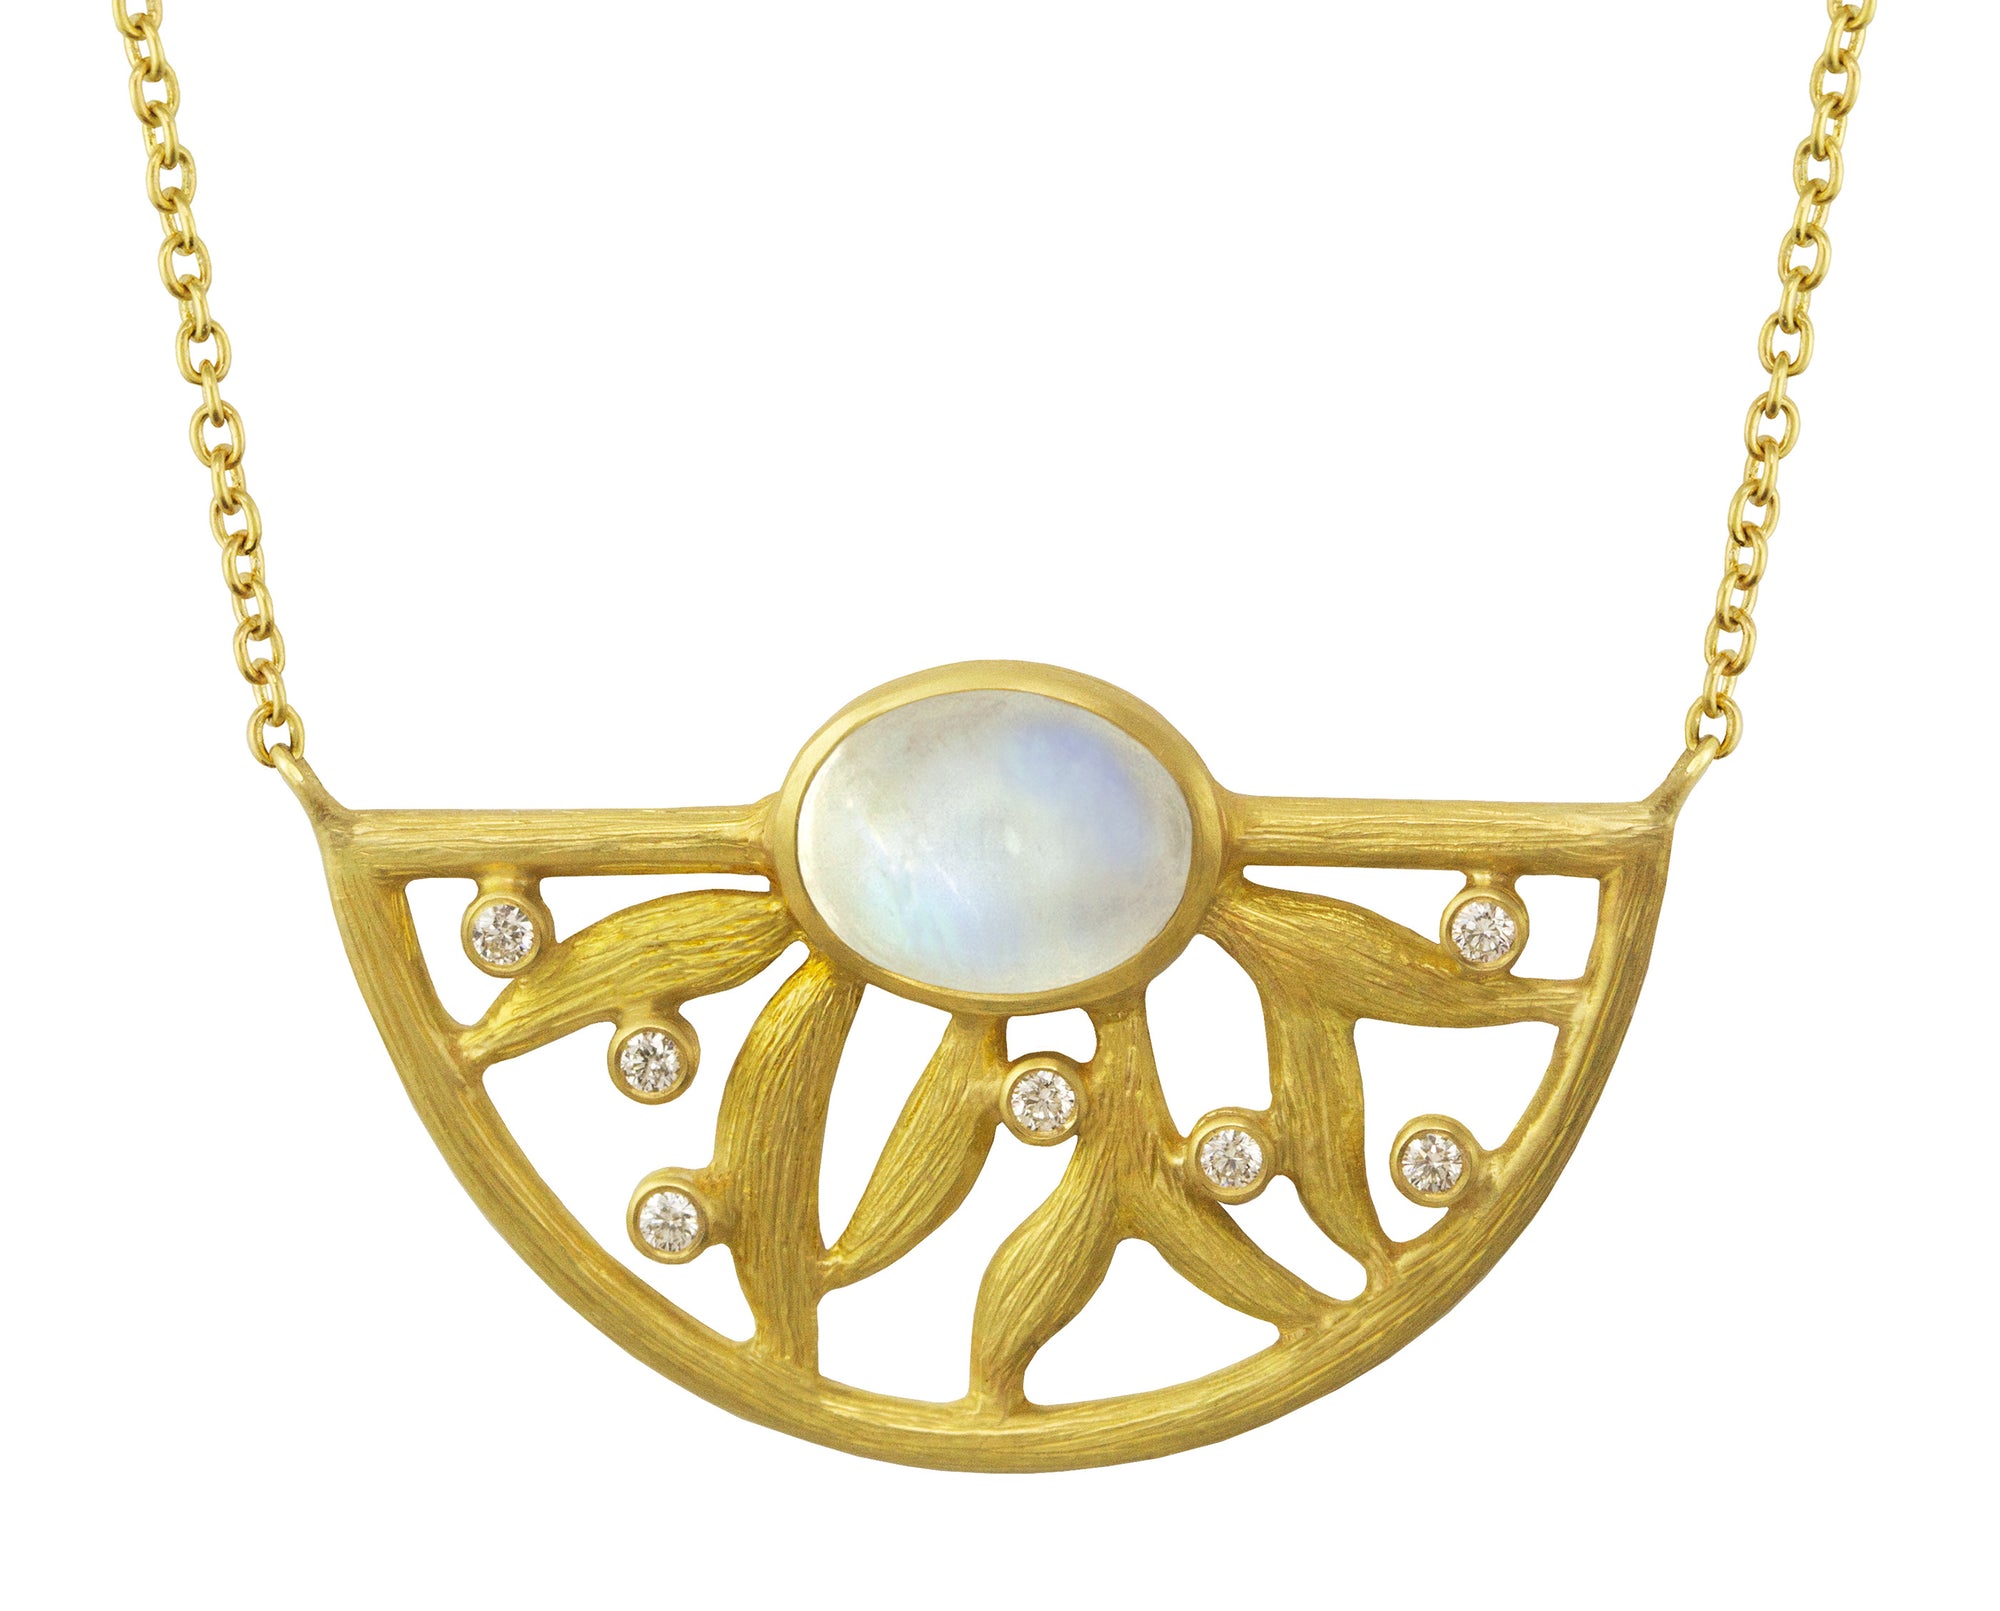 Vines Half Circle Pendant Necklace by Laurie Kaiseravailable at Talisman Collection Fine Jewelers in El Dorado Hills, CA and online. The Vines Half Circle Pendant Necklace is a work of art with a distinct Art Deco influence. Handcrafted in 18k yellow gold, this 17-inch necklace showcases a mesmerizing cabochon, rainbow moonstone at its center, accented by 0.07 carats of brilliant white round diamonds. Simply a beautiful piece that will bring you joy every time you put it on.